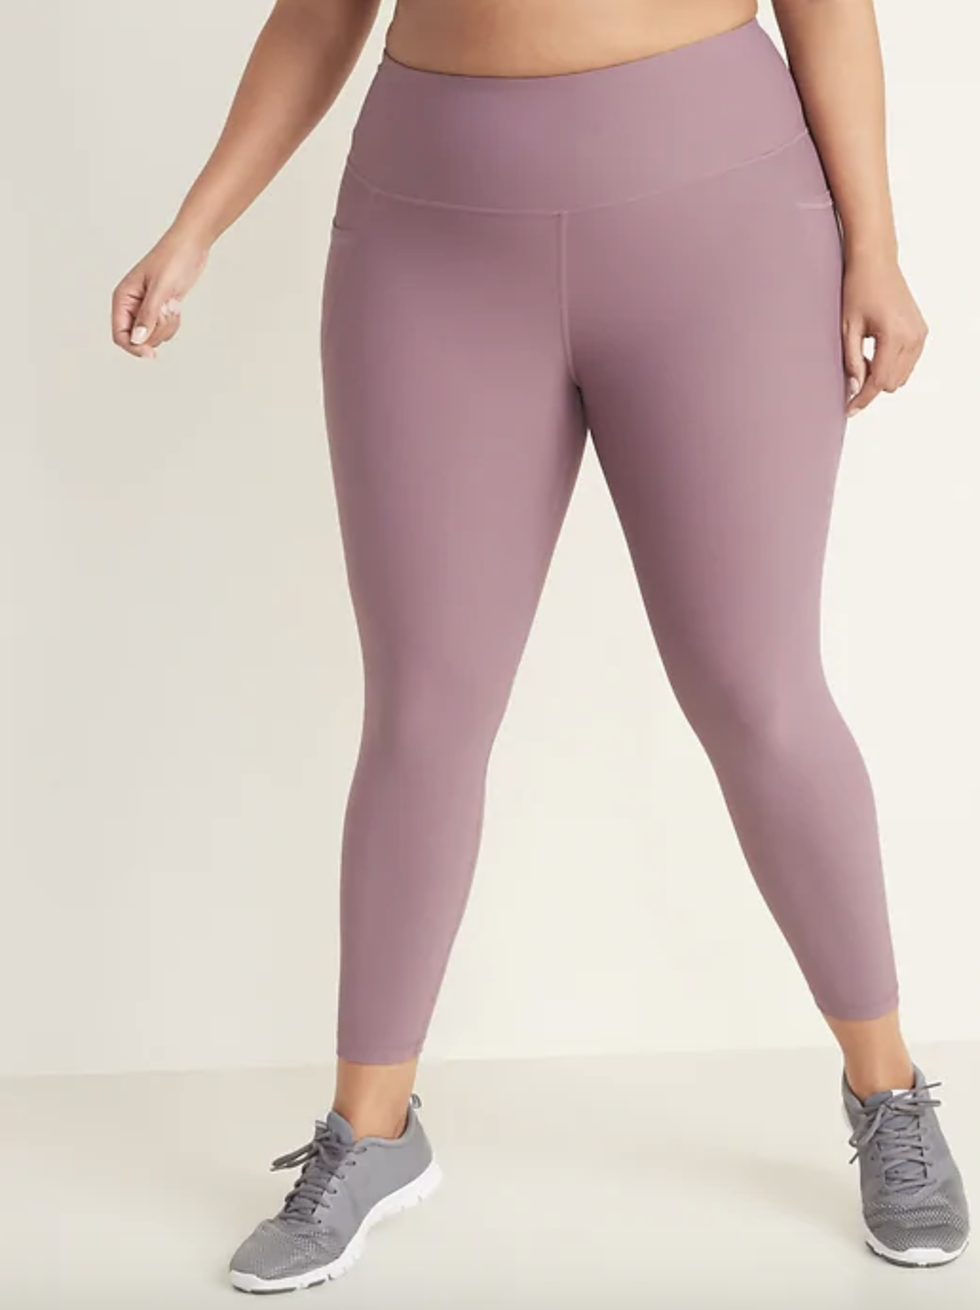 CW-X Comfort Athletic Tights for Women